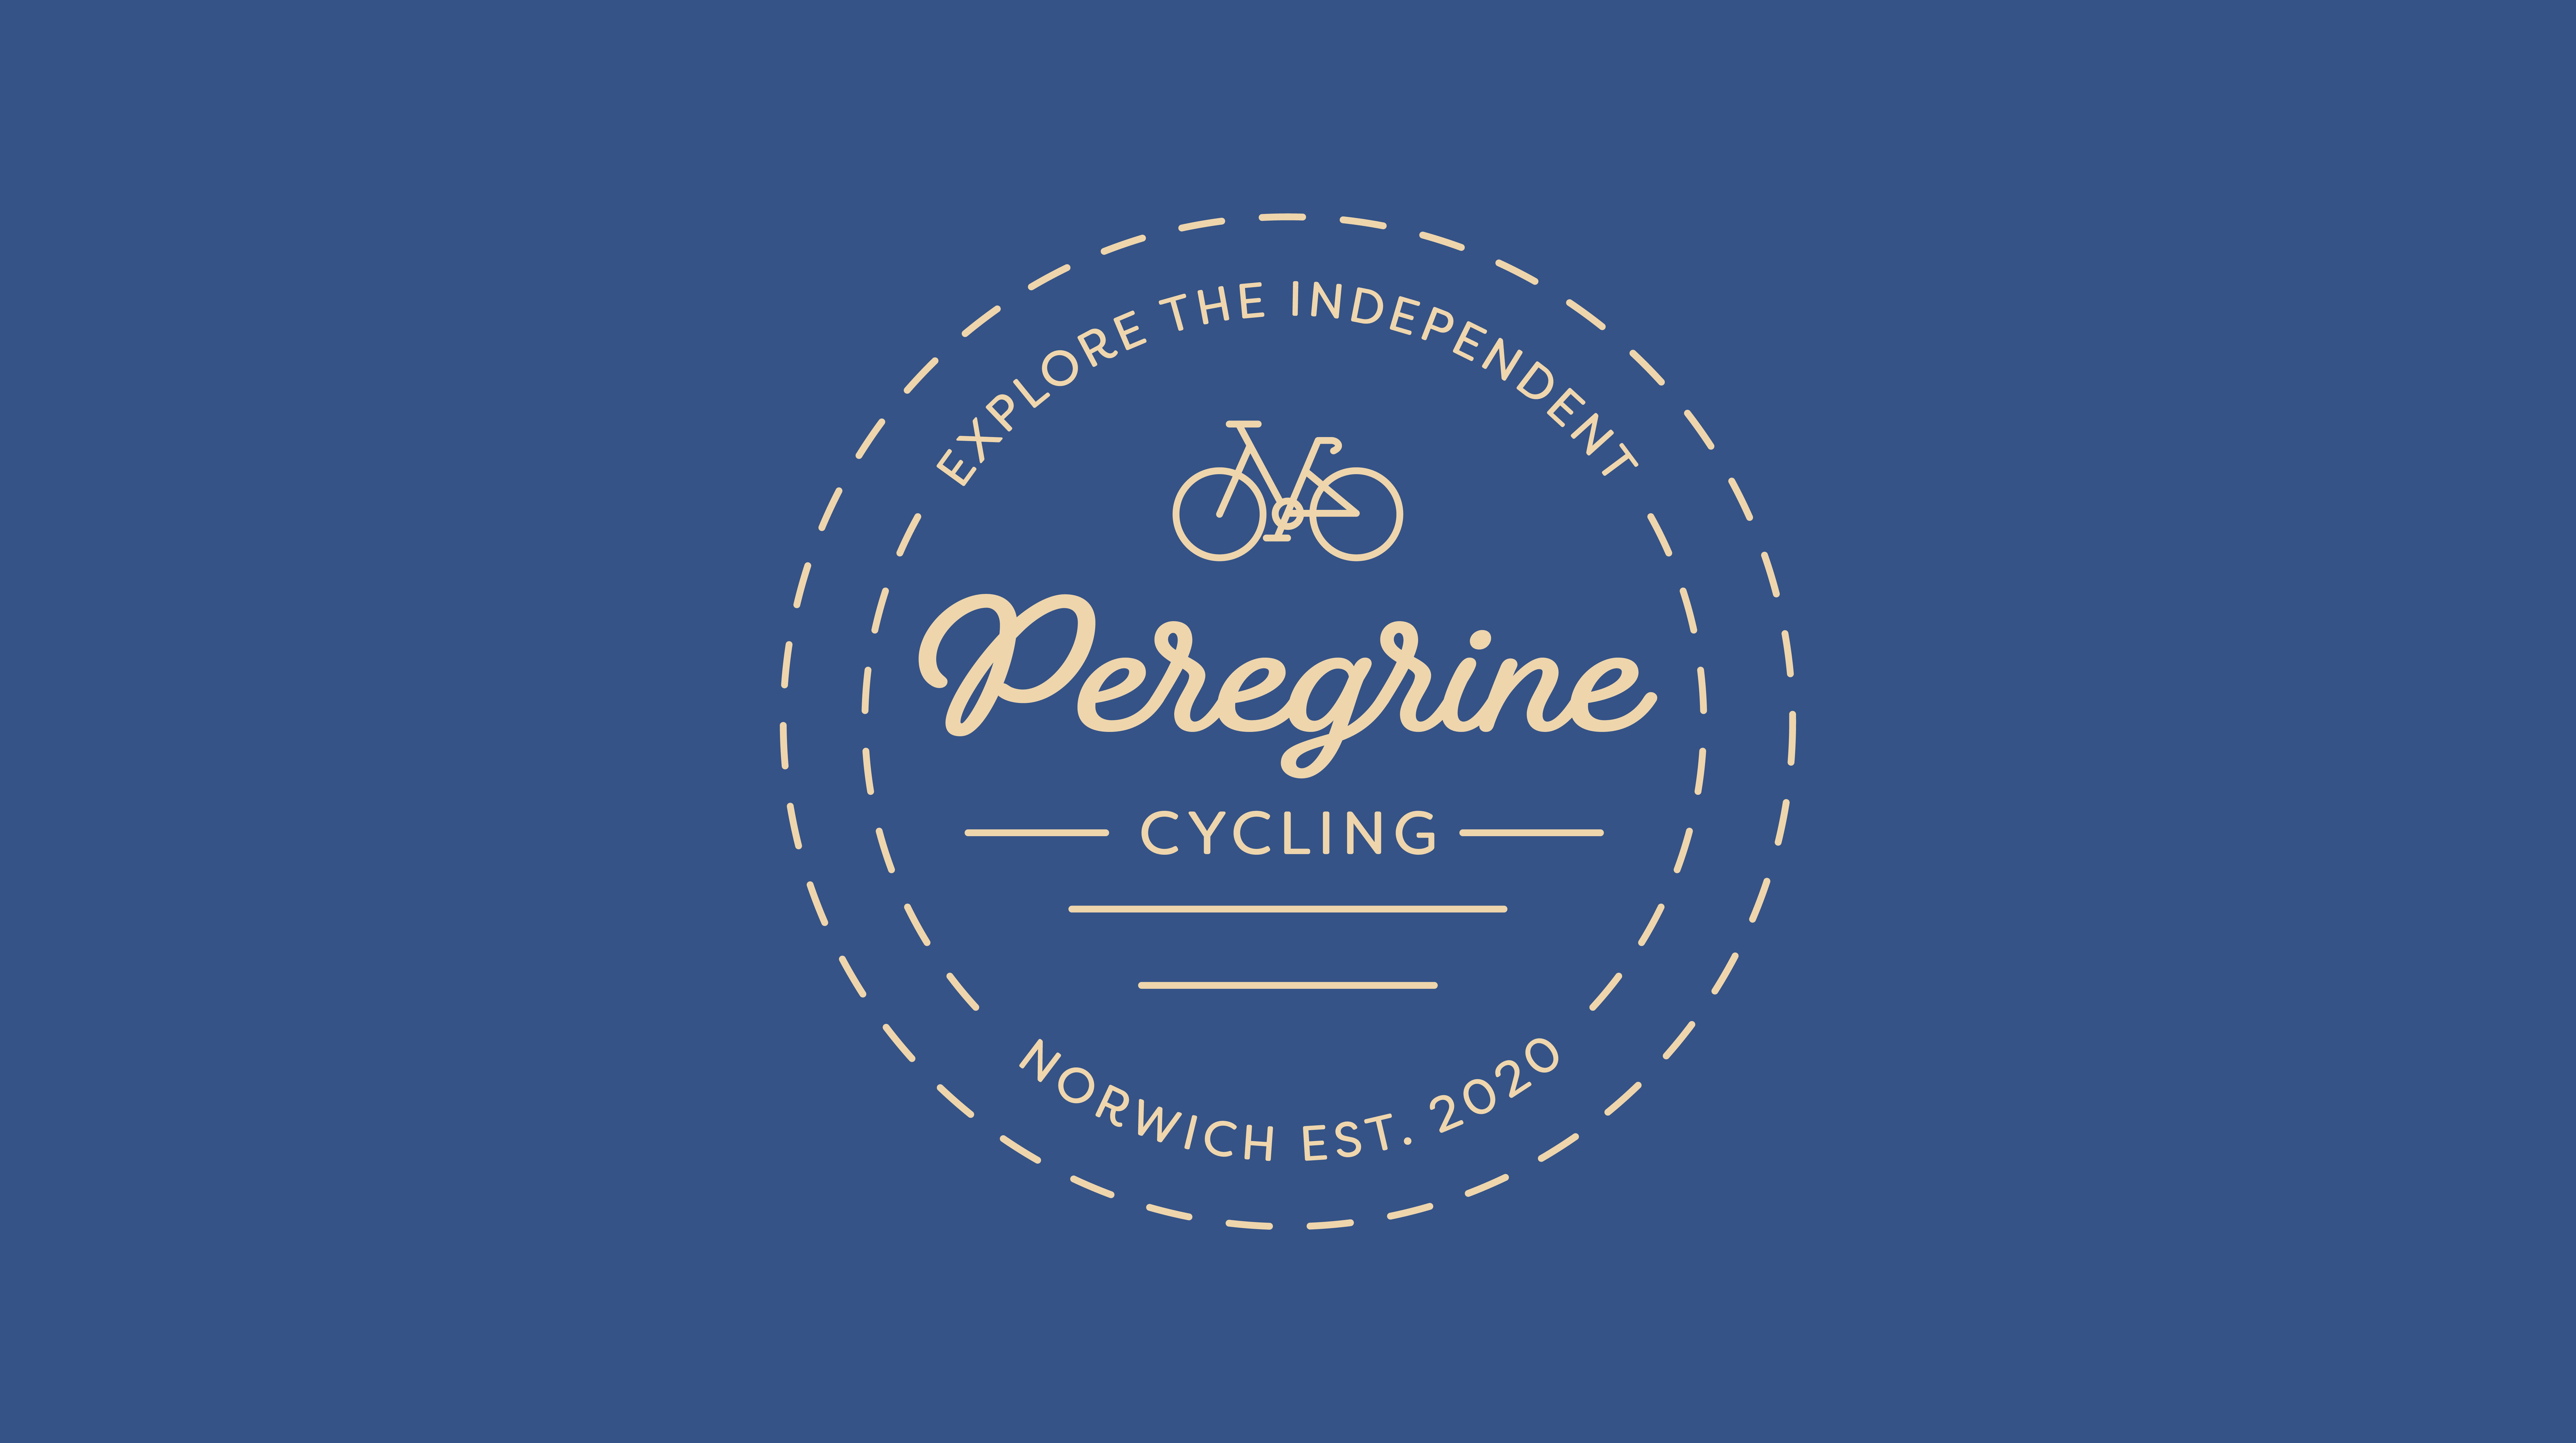 I chose to base my scheme in my home town of Norwich, Norfolk. Peregrine is a cycle hire scheme which encourages exploring the hidden gems and heritage of the city.